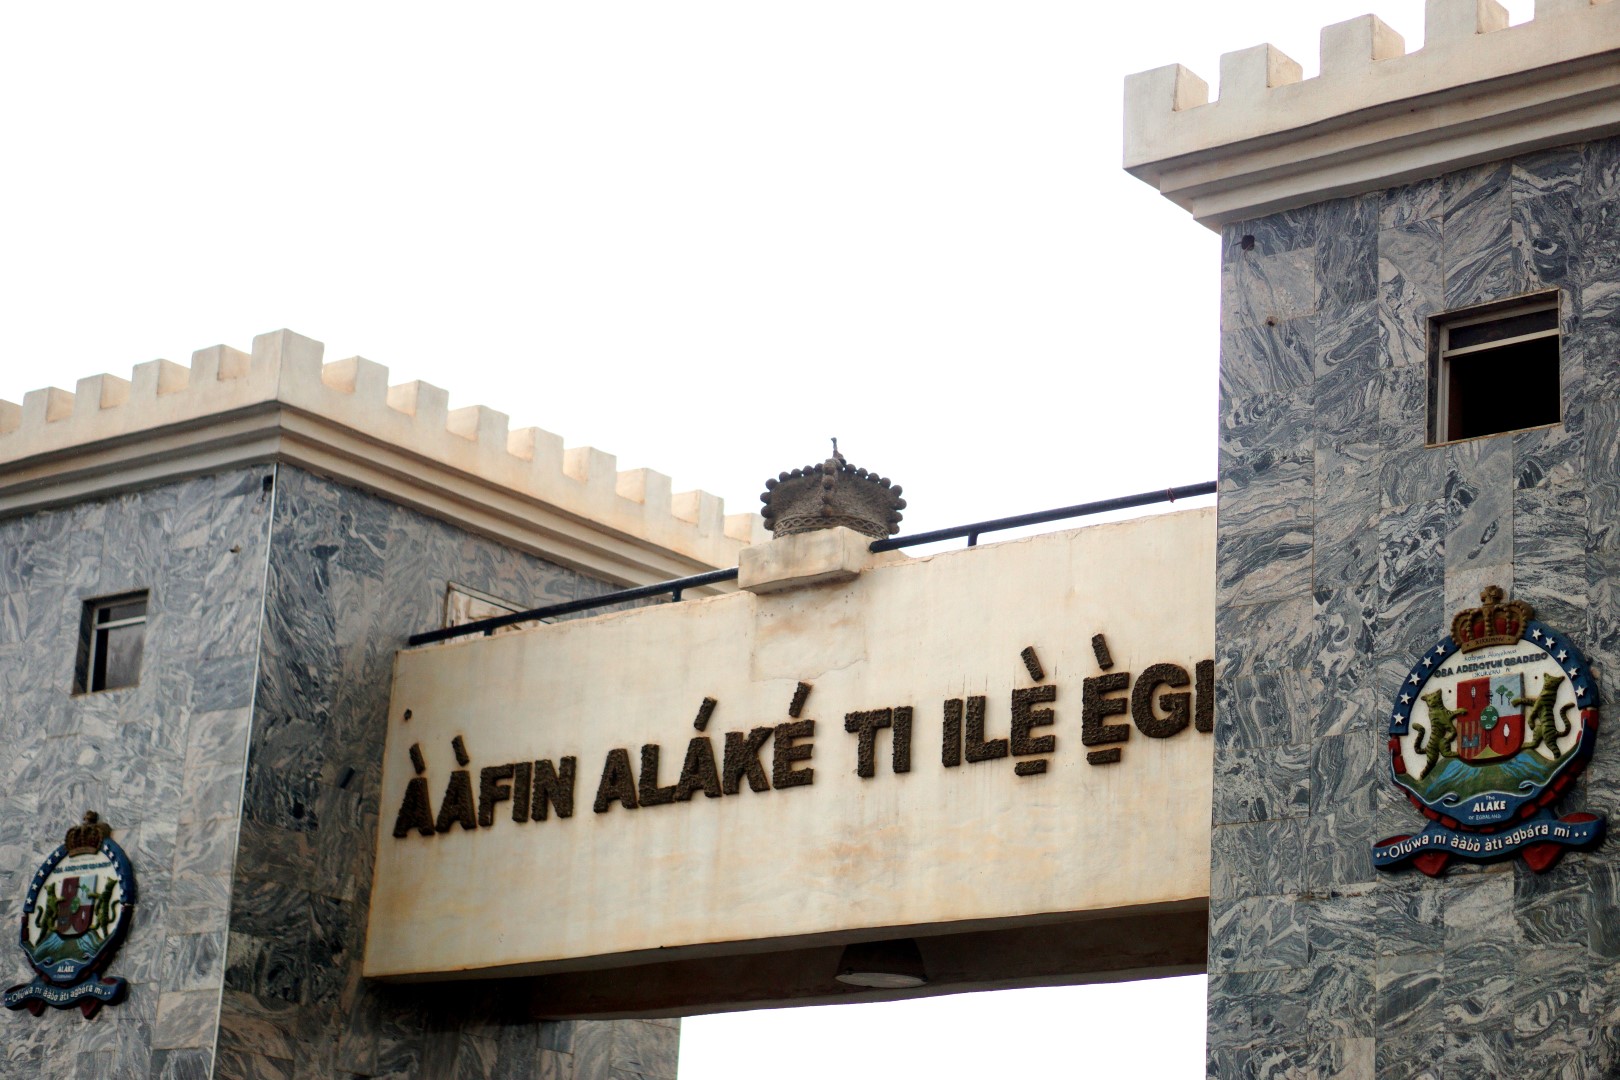 Sign at the entrance to the Ake's palace in abeokuta